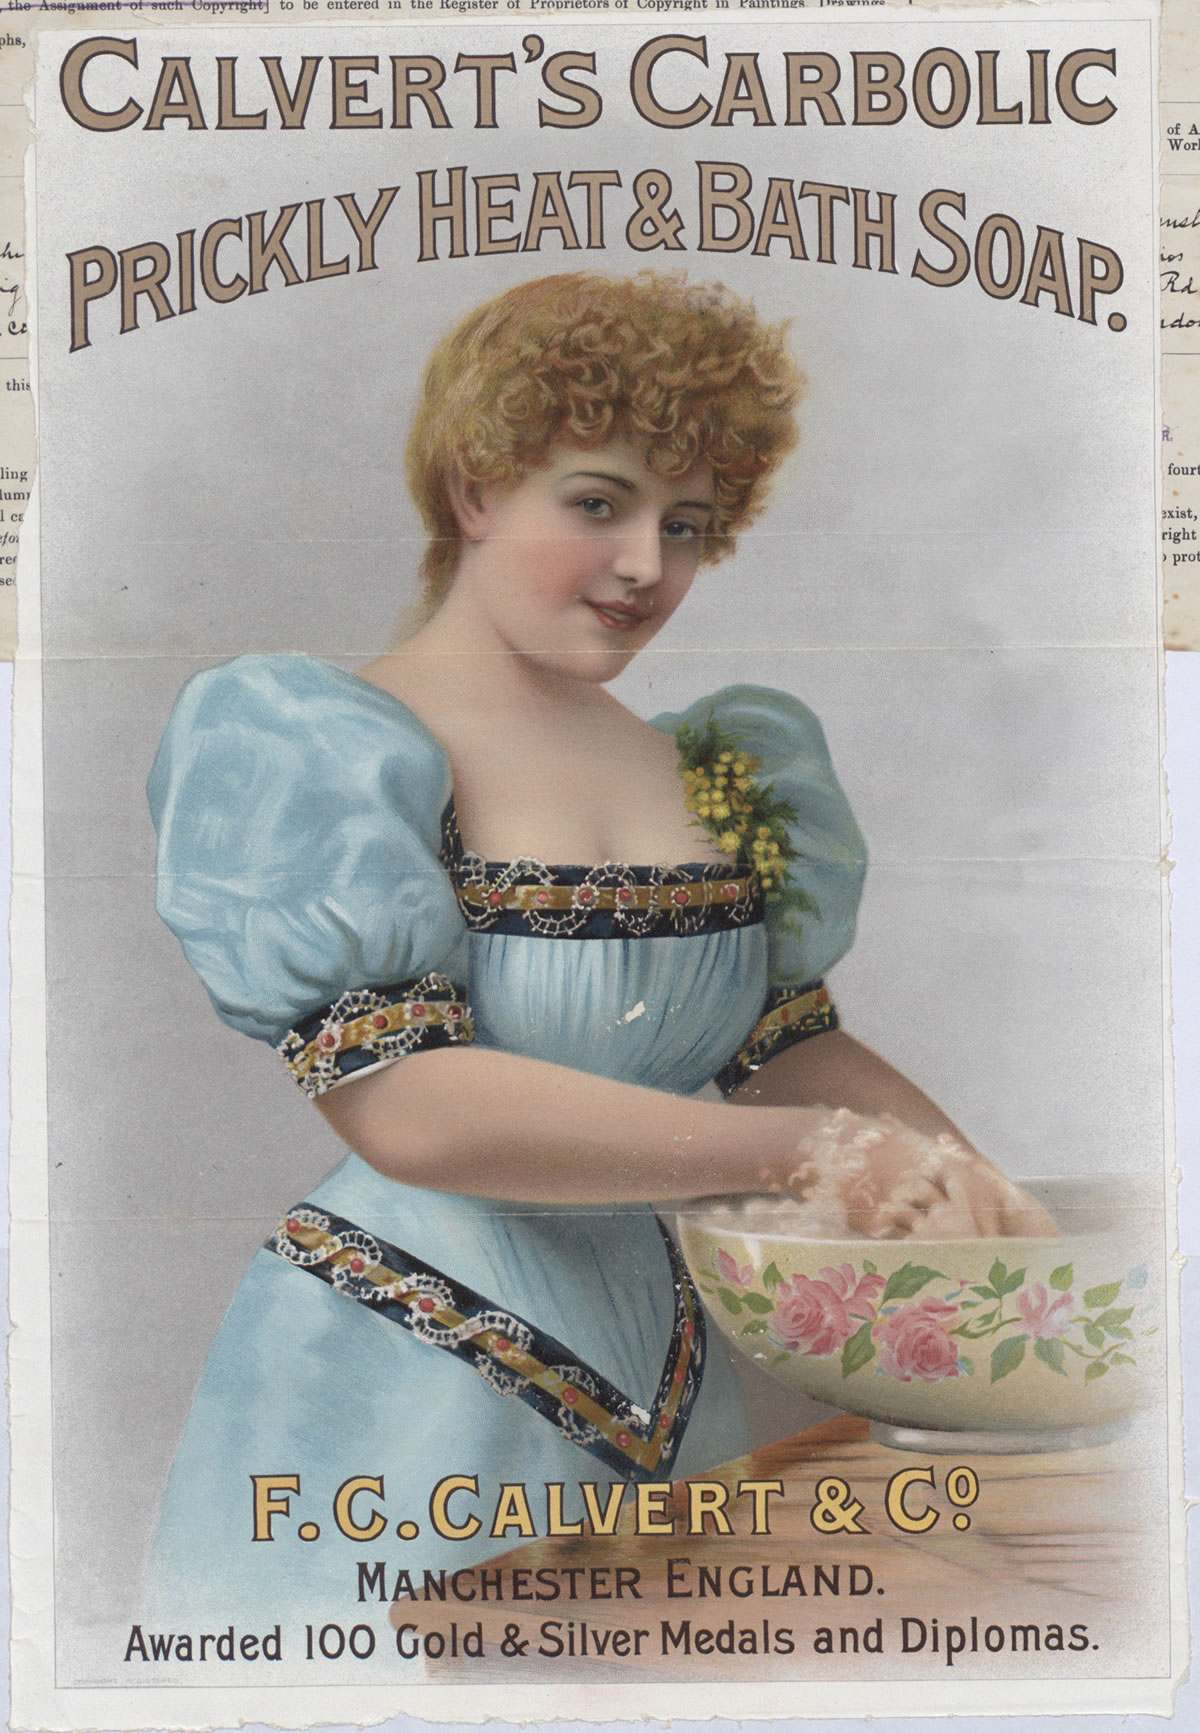 Advertisement for Calvert's carbolic soap, a mild disinfectant soap used for household cleaning, 1899 (COPY 1/146 f.634)